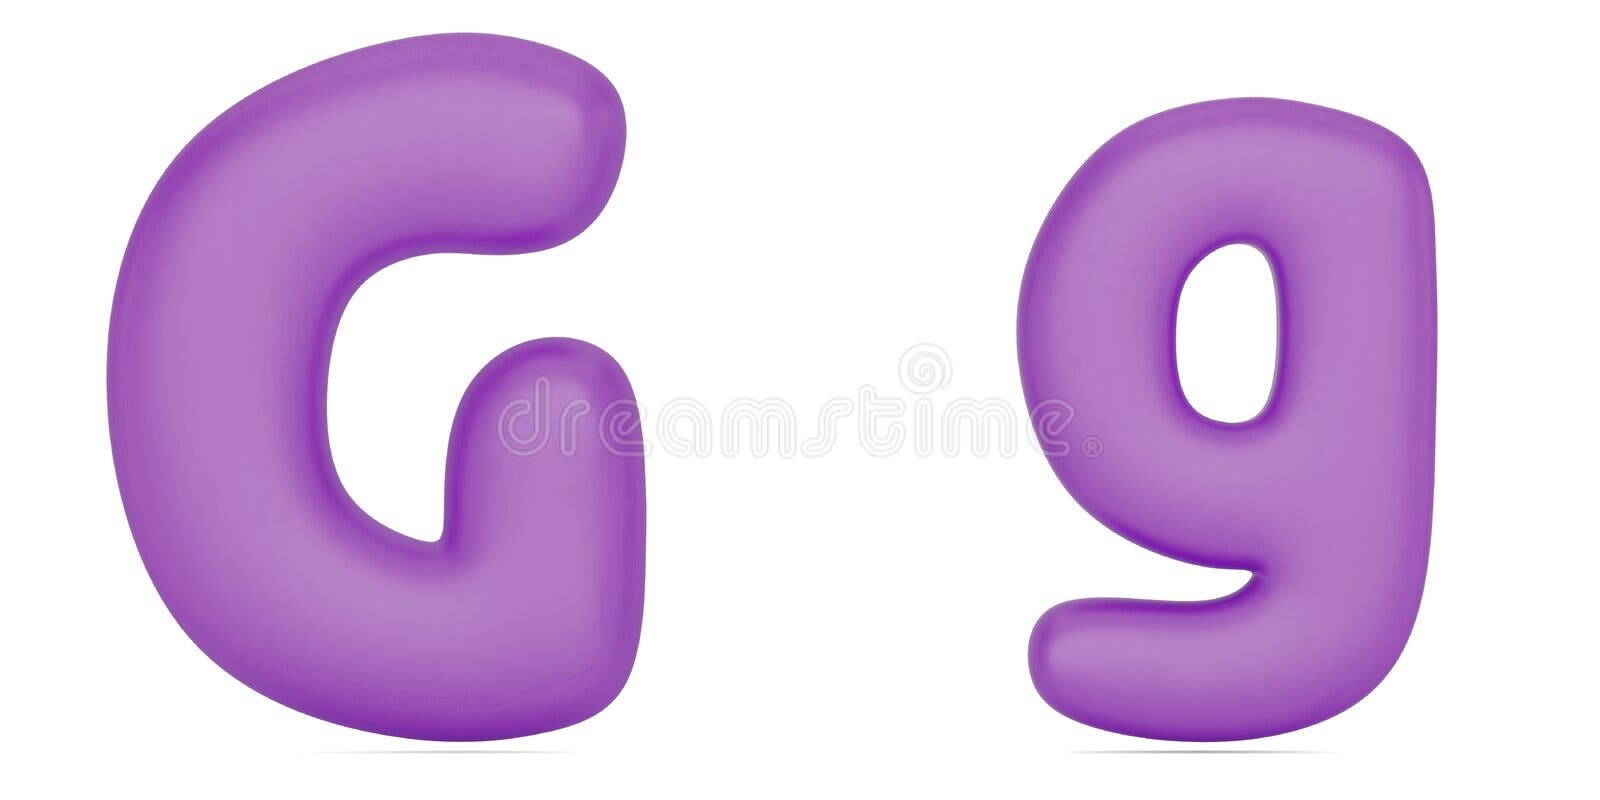 Glossy Color Fat Cartoon Alphabet Letter E Isolated on White Background ...